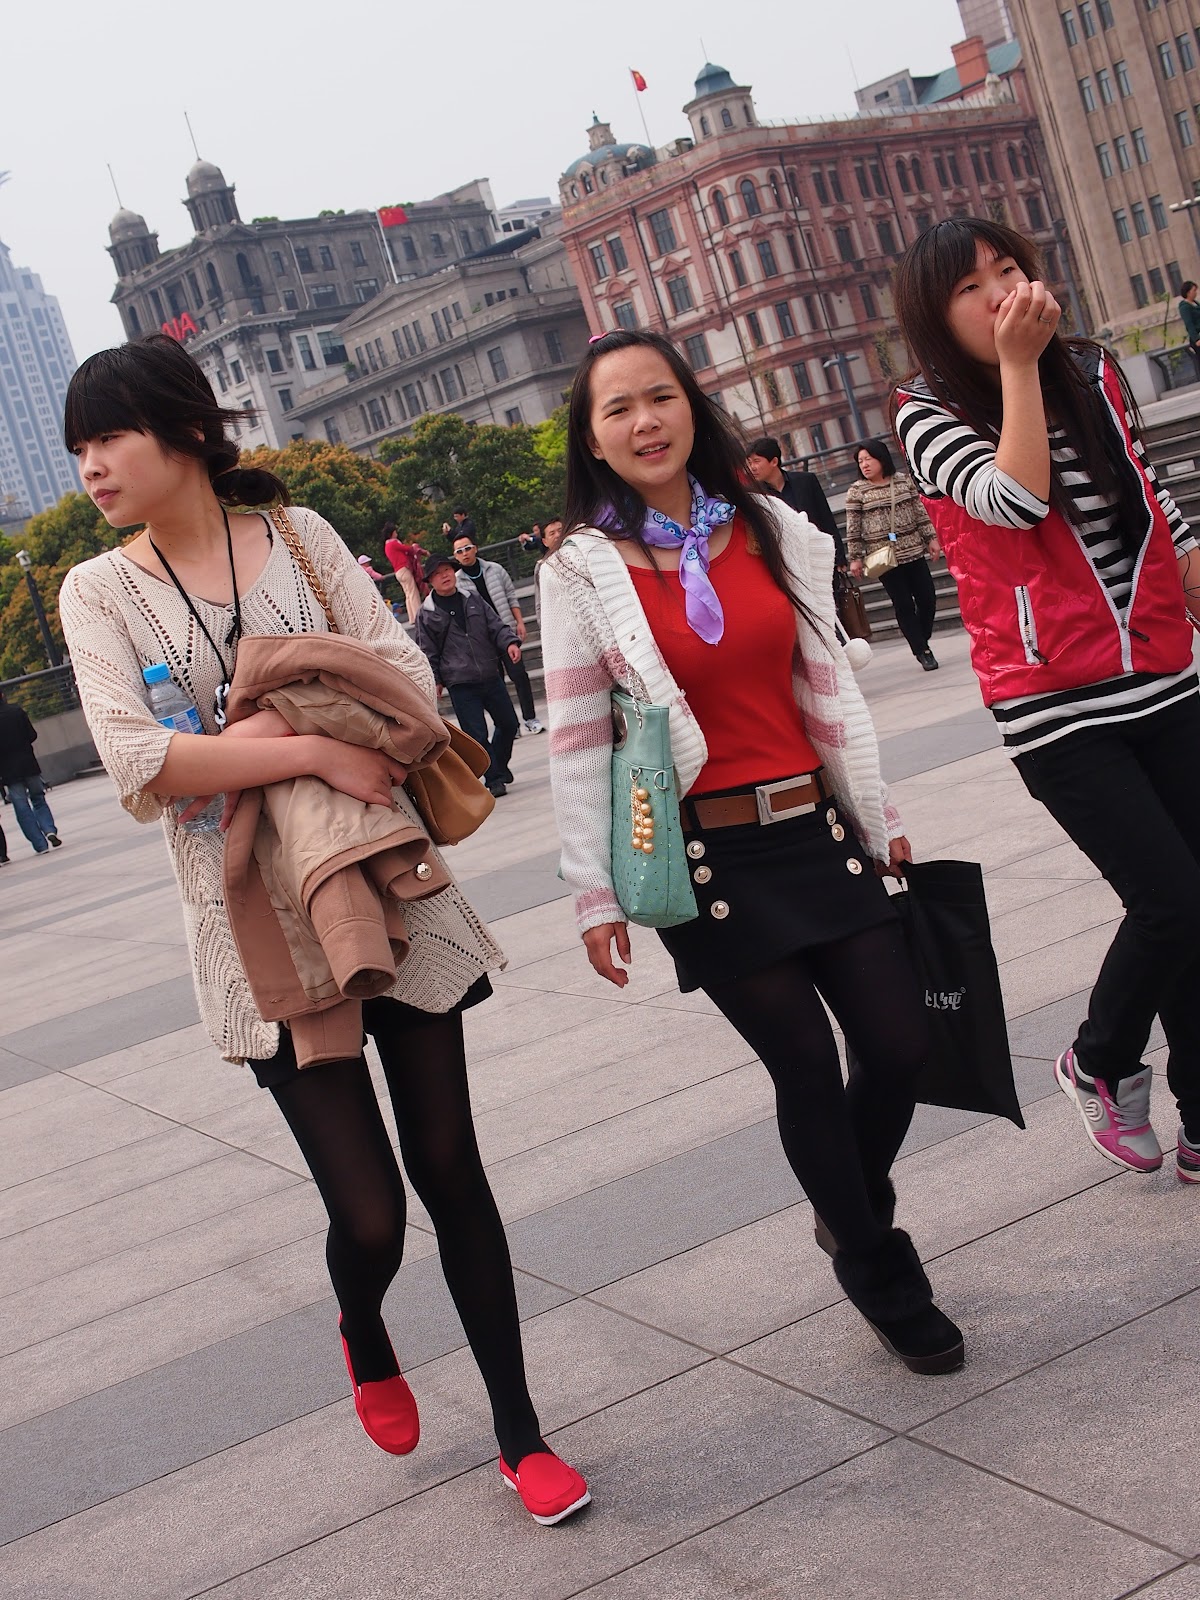 pernety stop: beijing and shanghai: street fashion